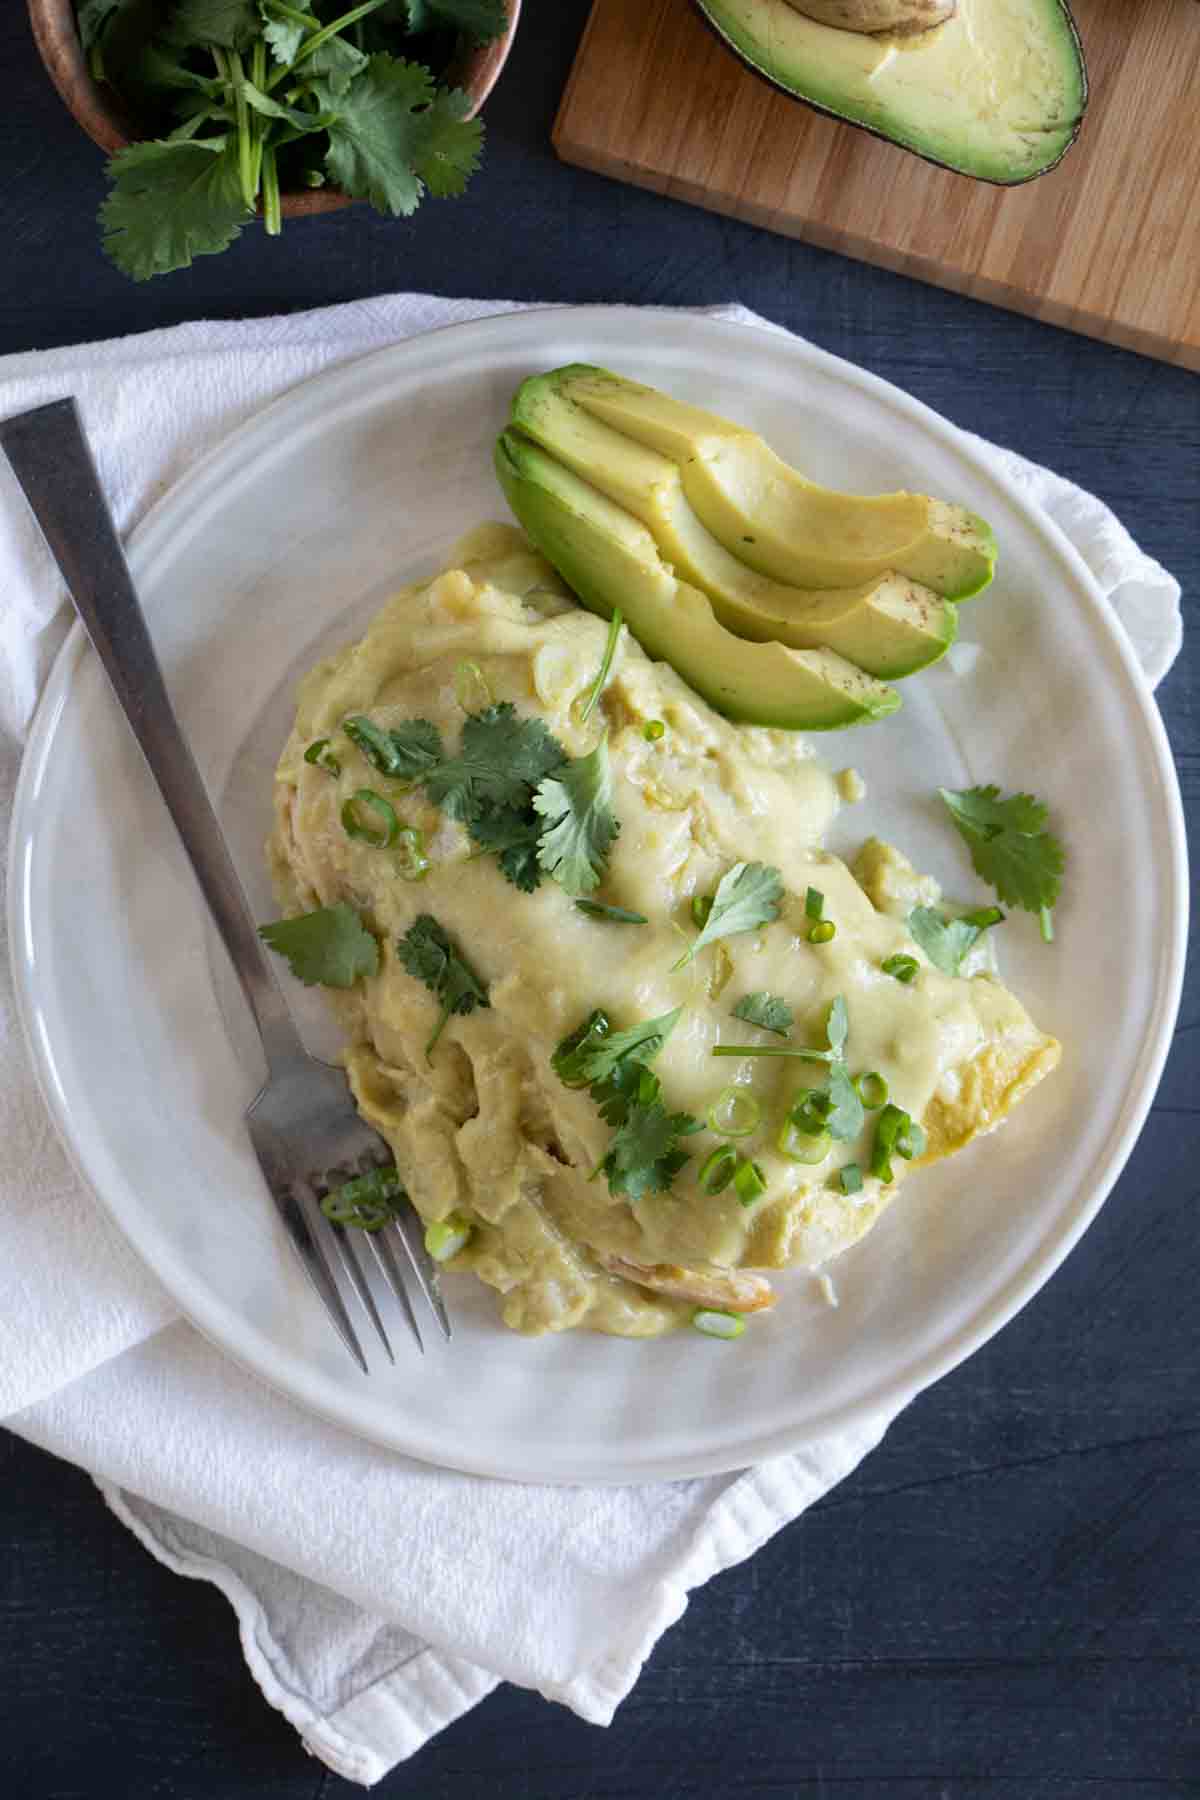 Green Chicken Enchiladas with avocado on the side